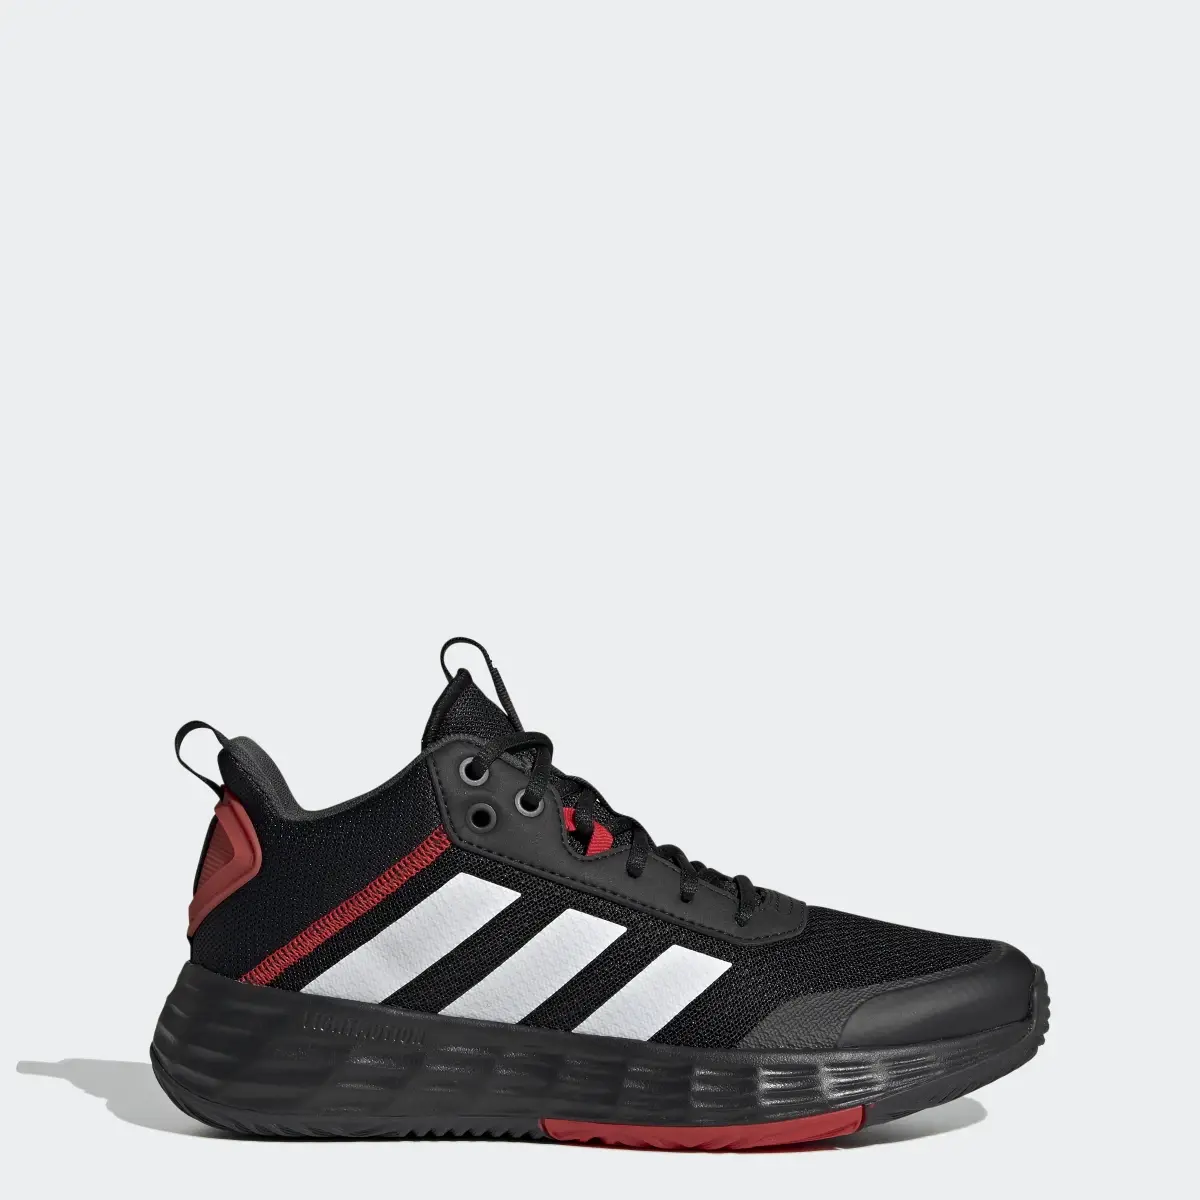 Adidas Ownthegame Shoes. 1